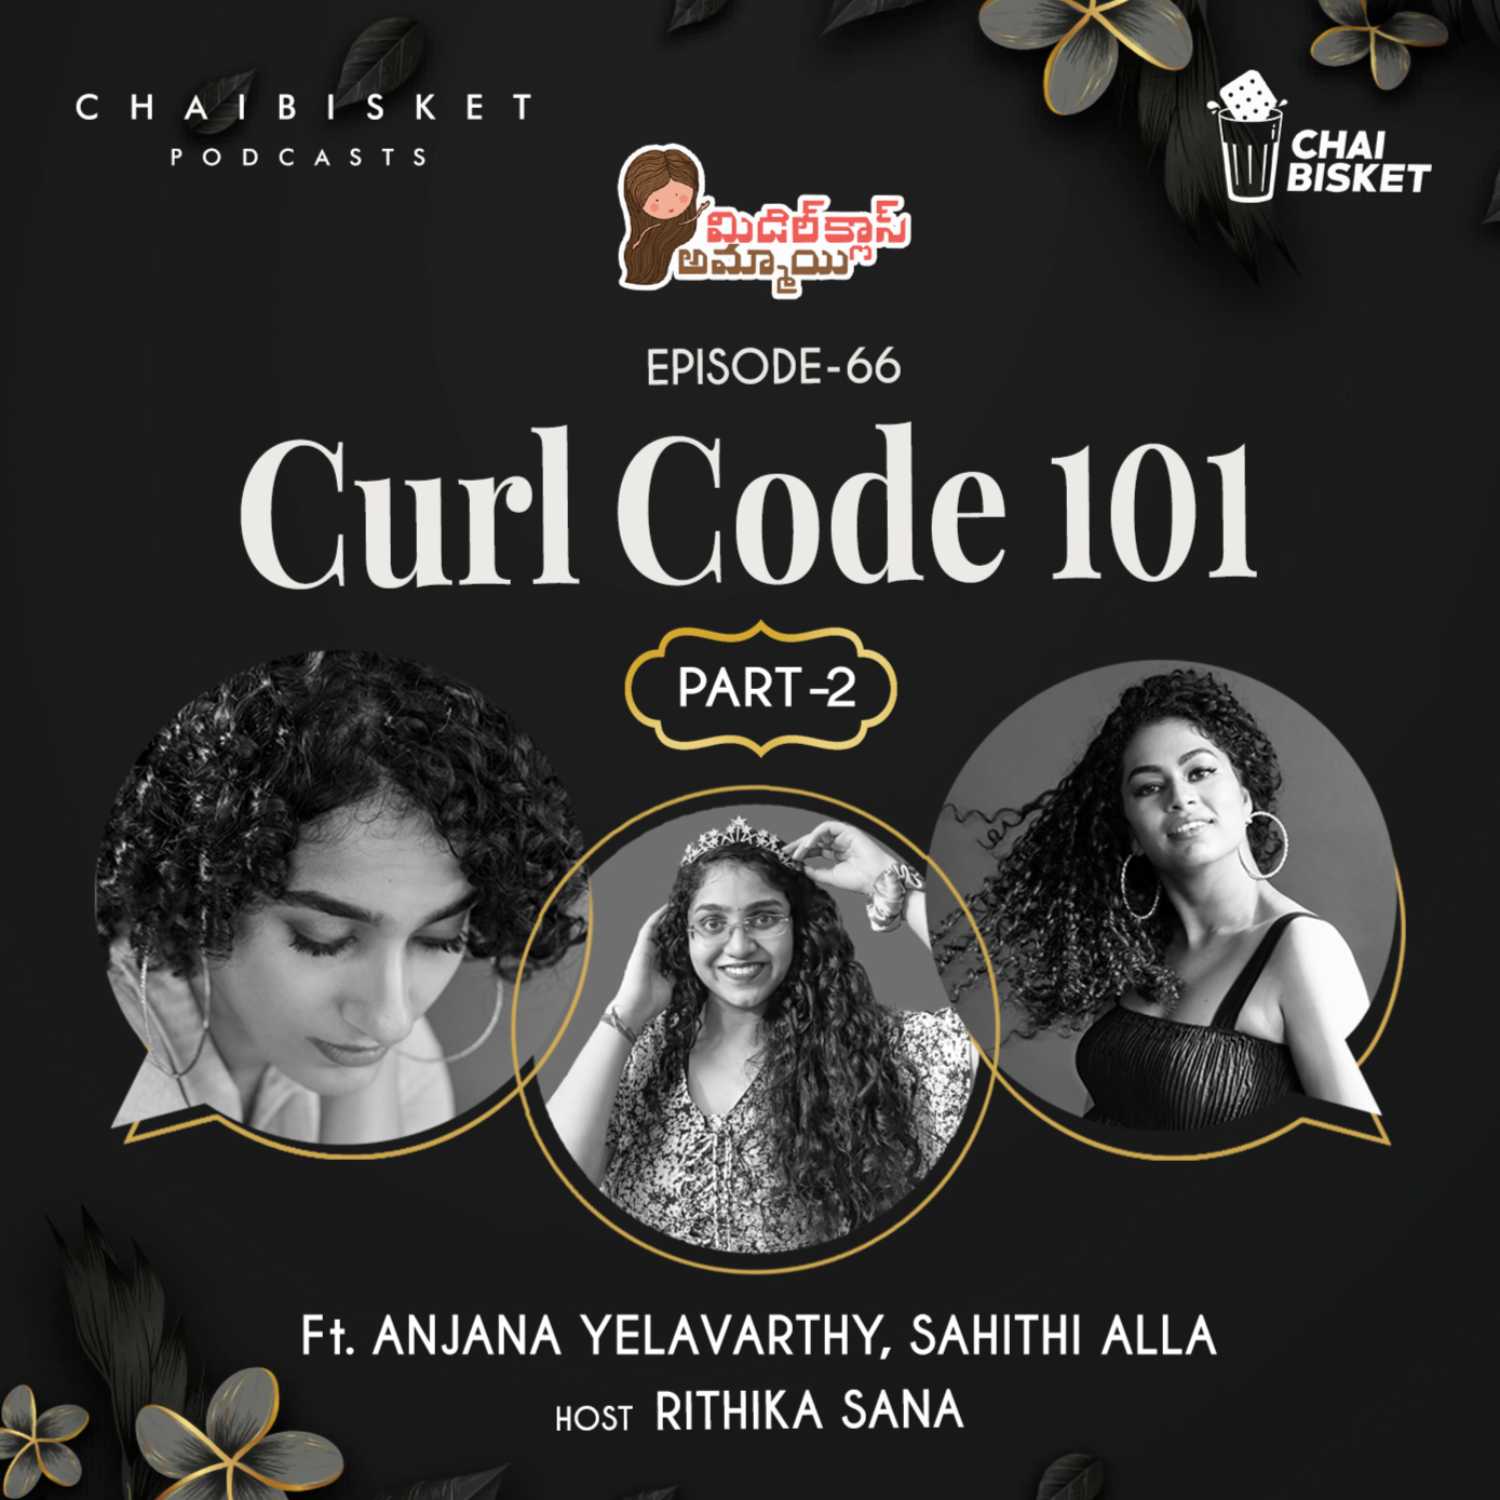 Episode-66: CURL CODE 101 (PART-2) | Middle Class Ammayi | A Telugu Podcast by Rithika Sana